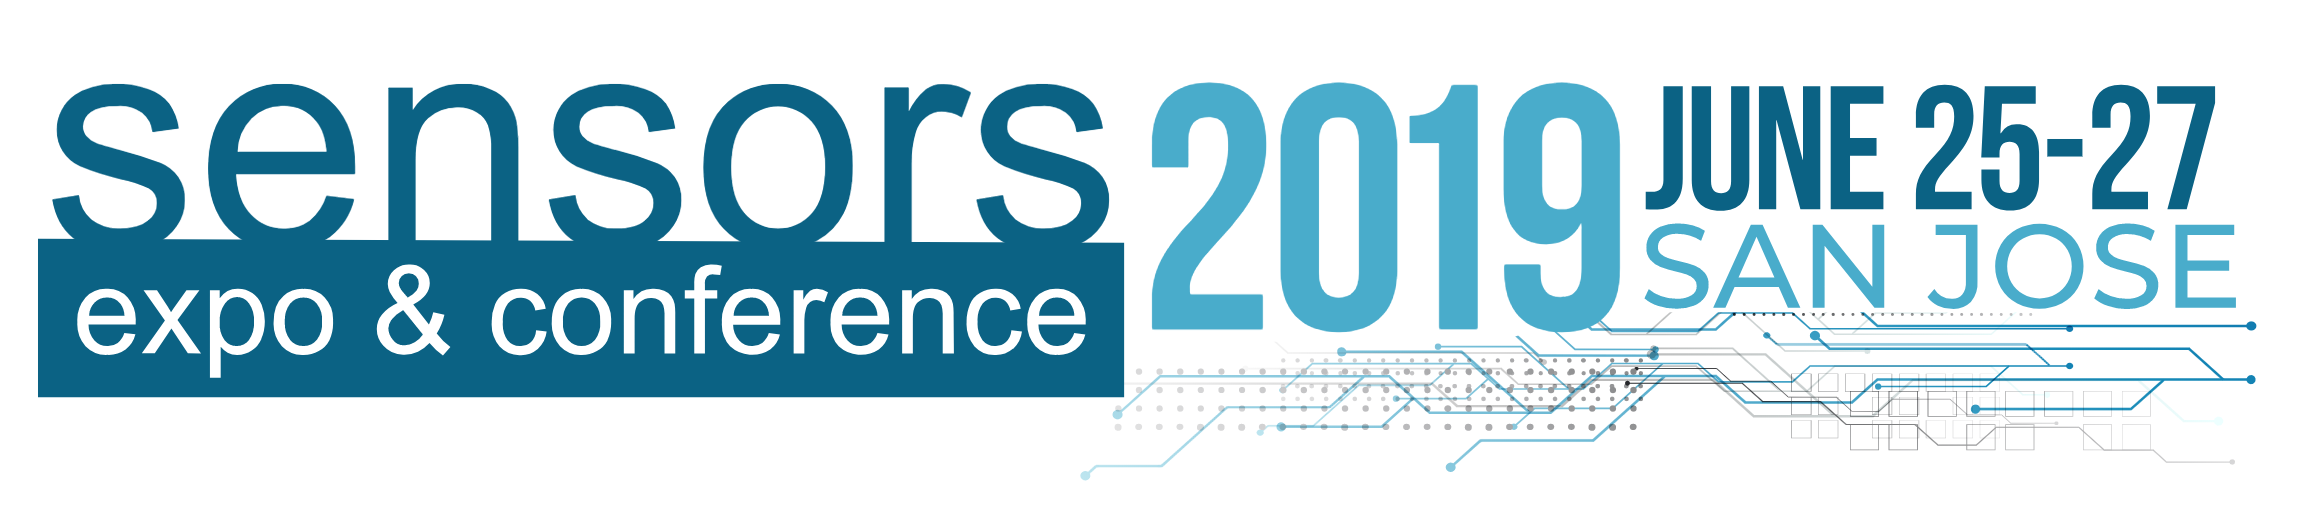 June 2019 Connector Industry News > Event News - Sensors Expo 2019